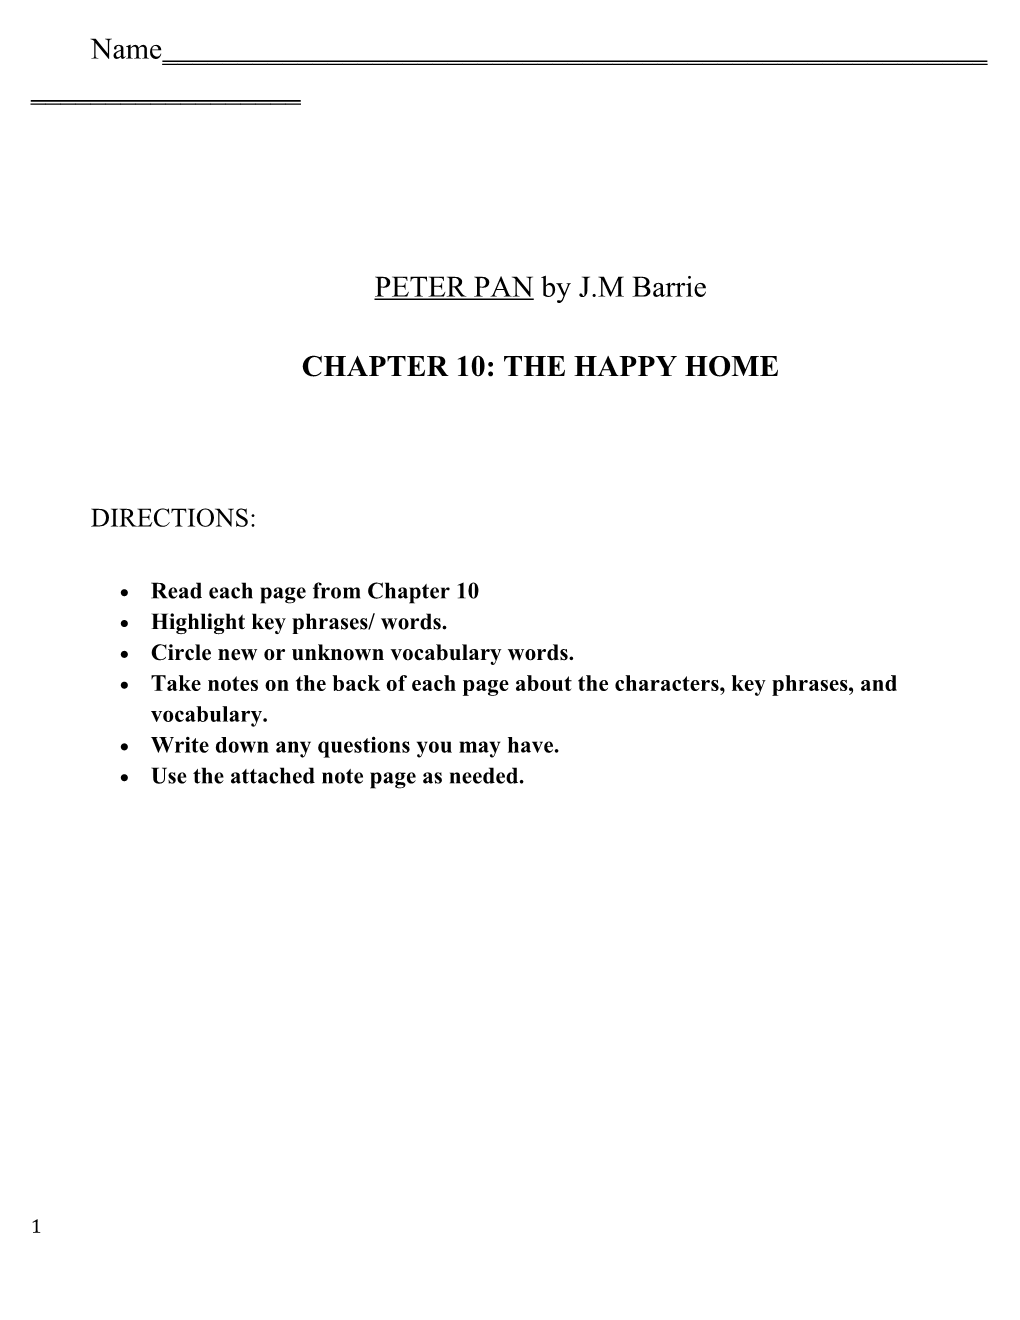 Chapter 10: the Happy Home